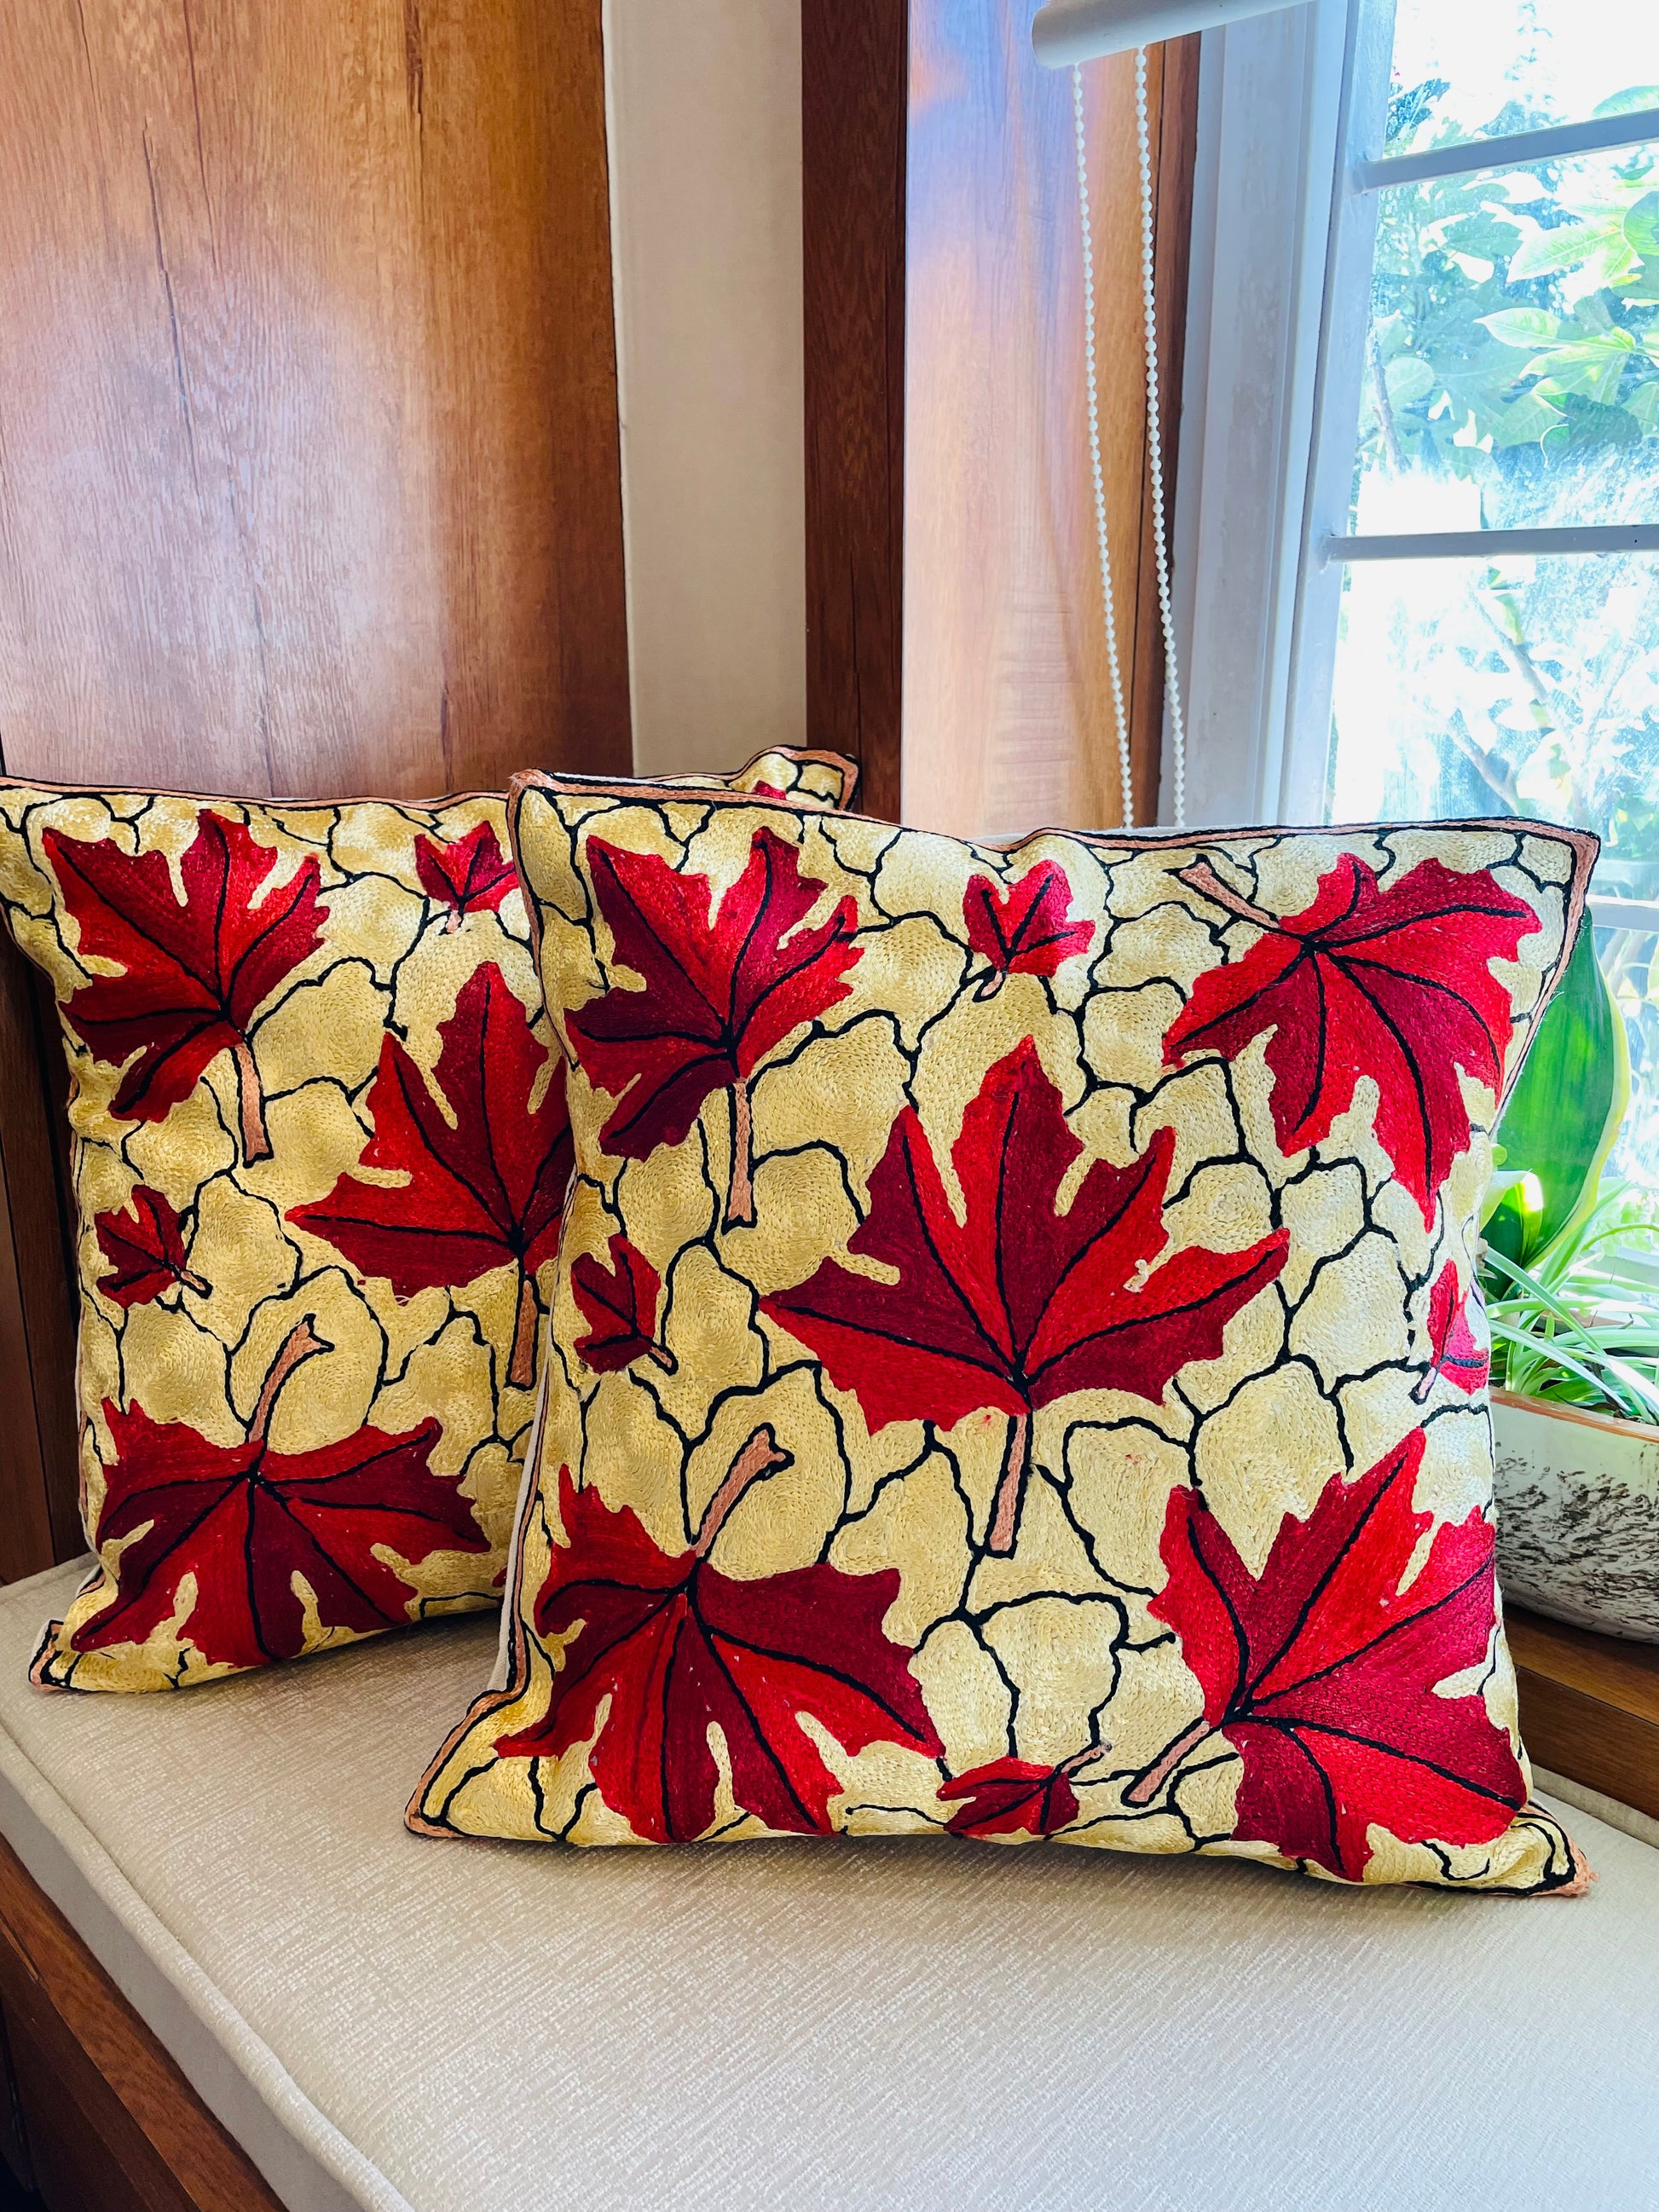 Maple leaf embroidered cushion cover Chainstitch embroidery Handcrafted home decor Kashmiri artisans Mill dyed cotton fabric Silk thread embroidery Colorful floral motif Elegant cream design Cozy home accents Unique cushion cover Interior design trend Decorative throw pillow Handmade craftsmanship Home decor gift idea Cushion insert not included